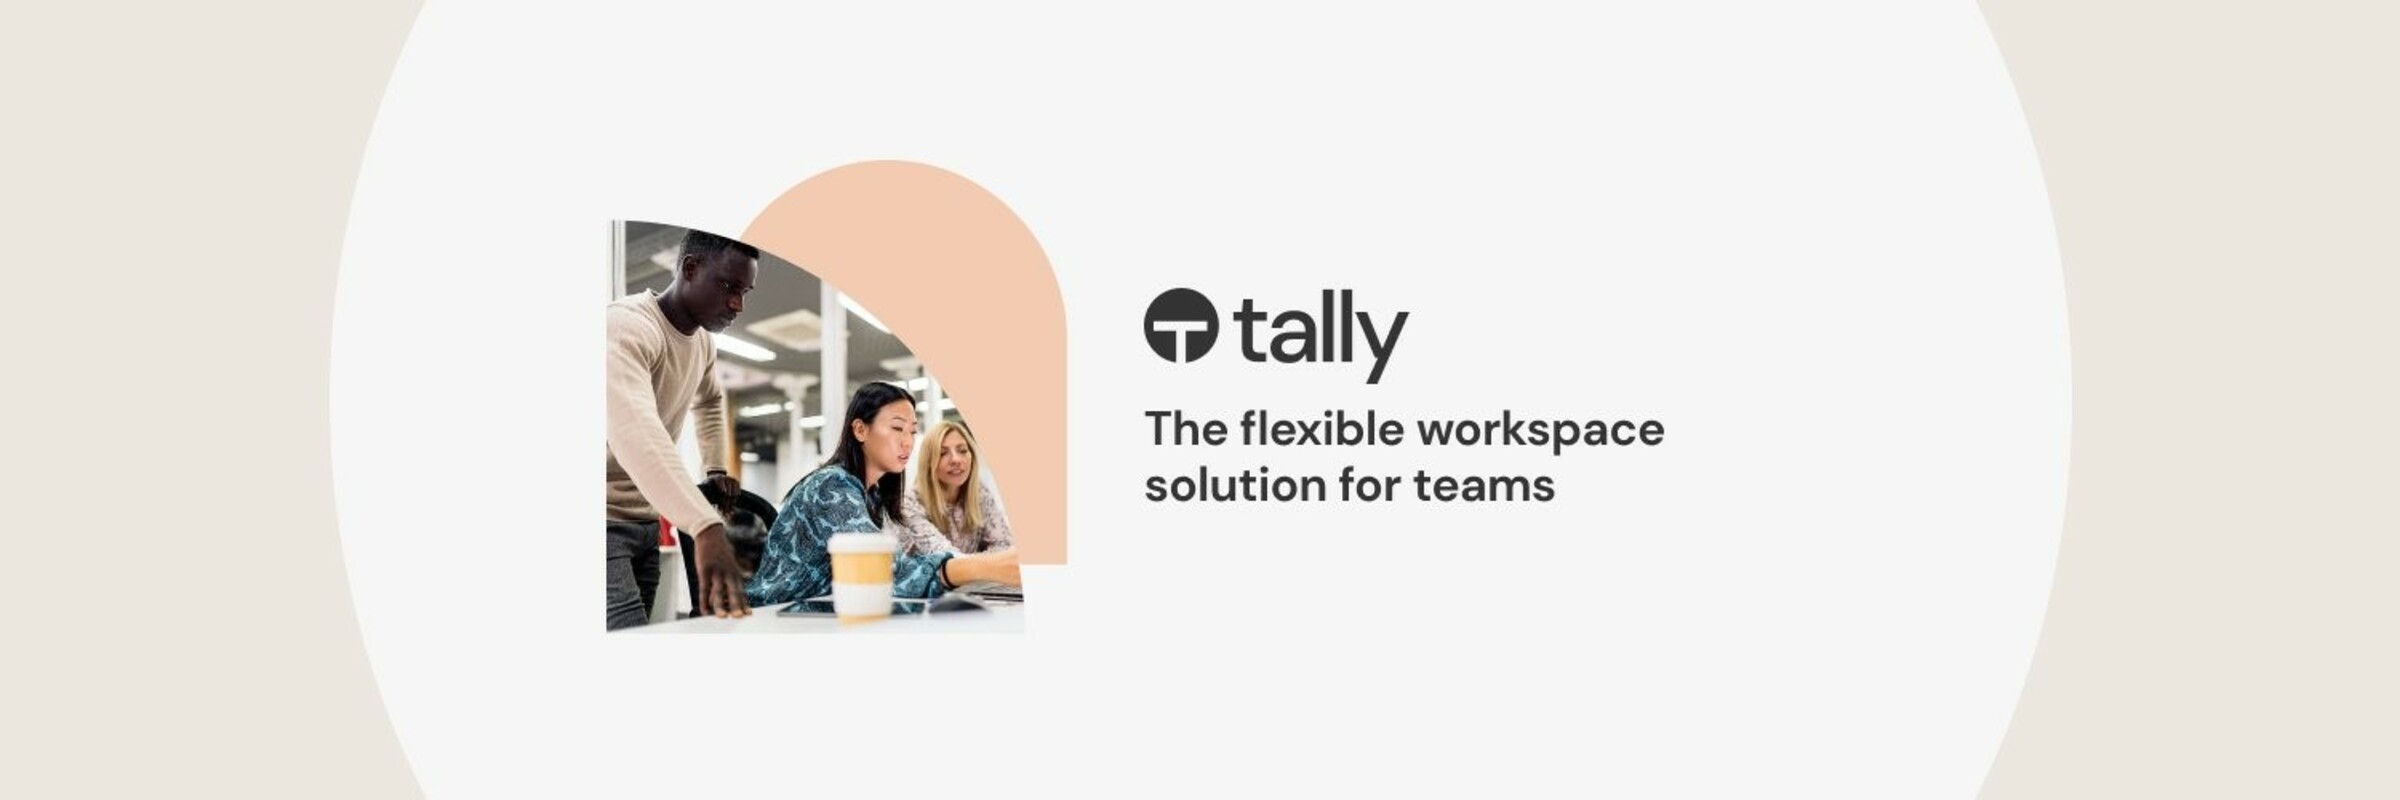 The flexible workspace solution for teams